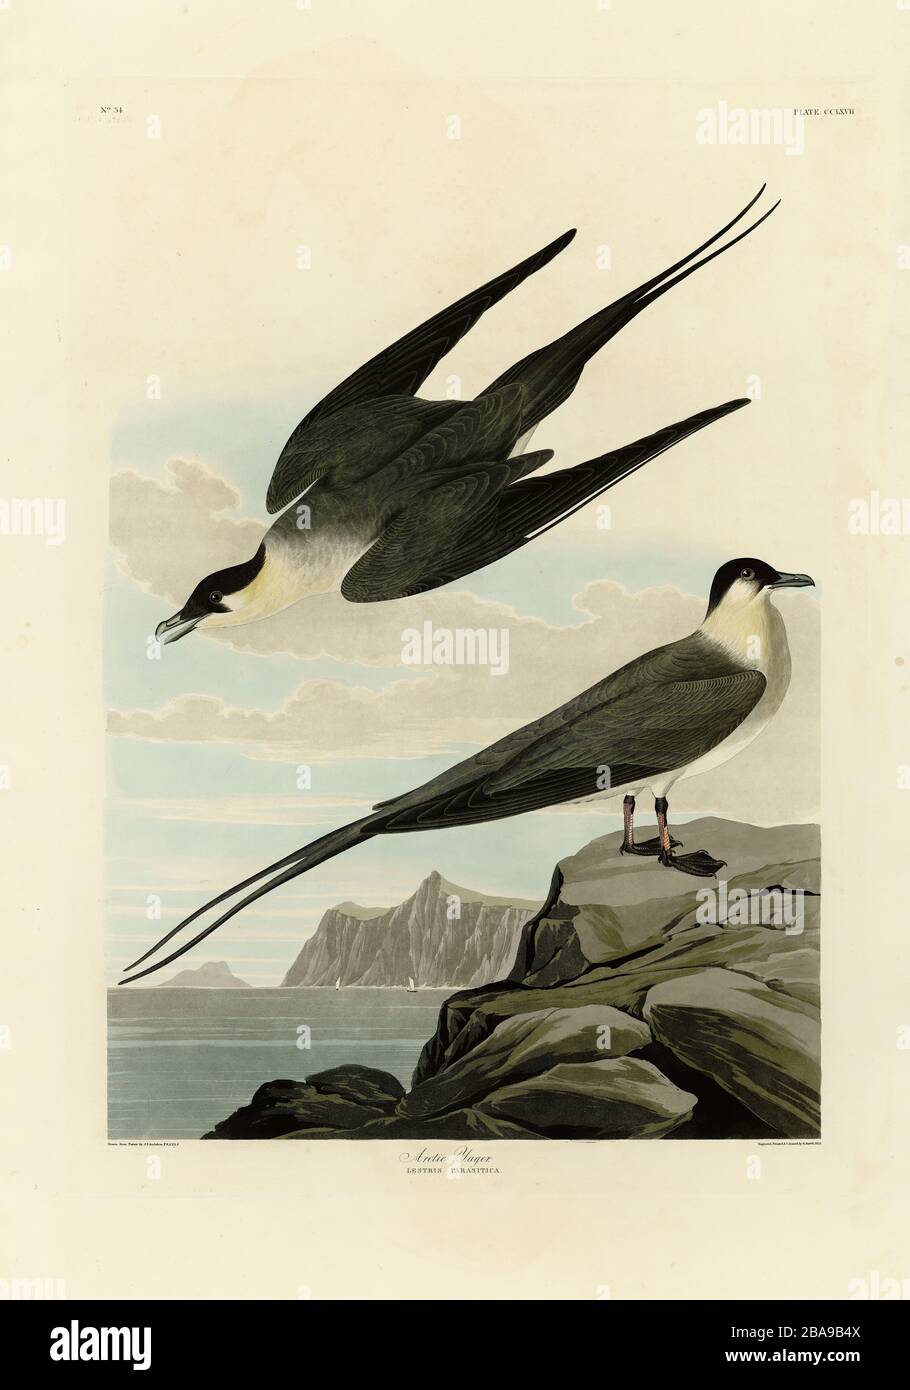 Plate 267 Arctic Yager (Long-tailed Jaeger) The Birds of America folio (1827–1839) John James Audubon - Very high resolution and quality edited image Stock Photo